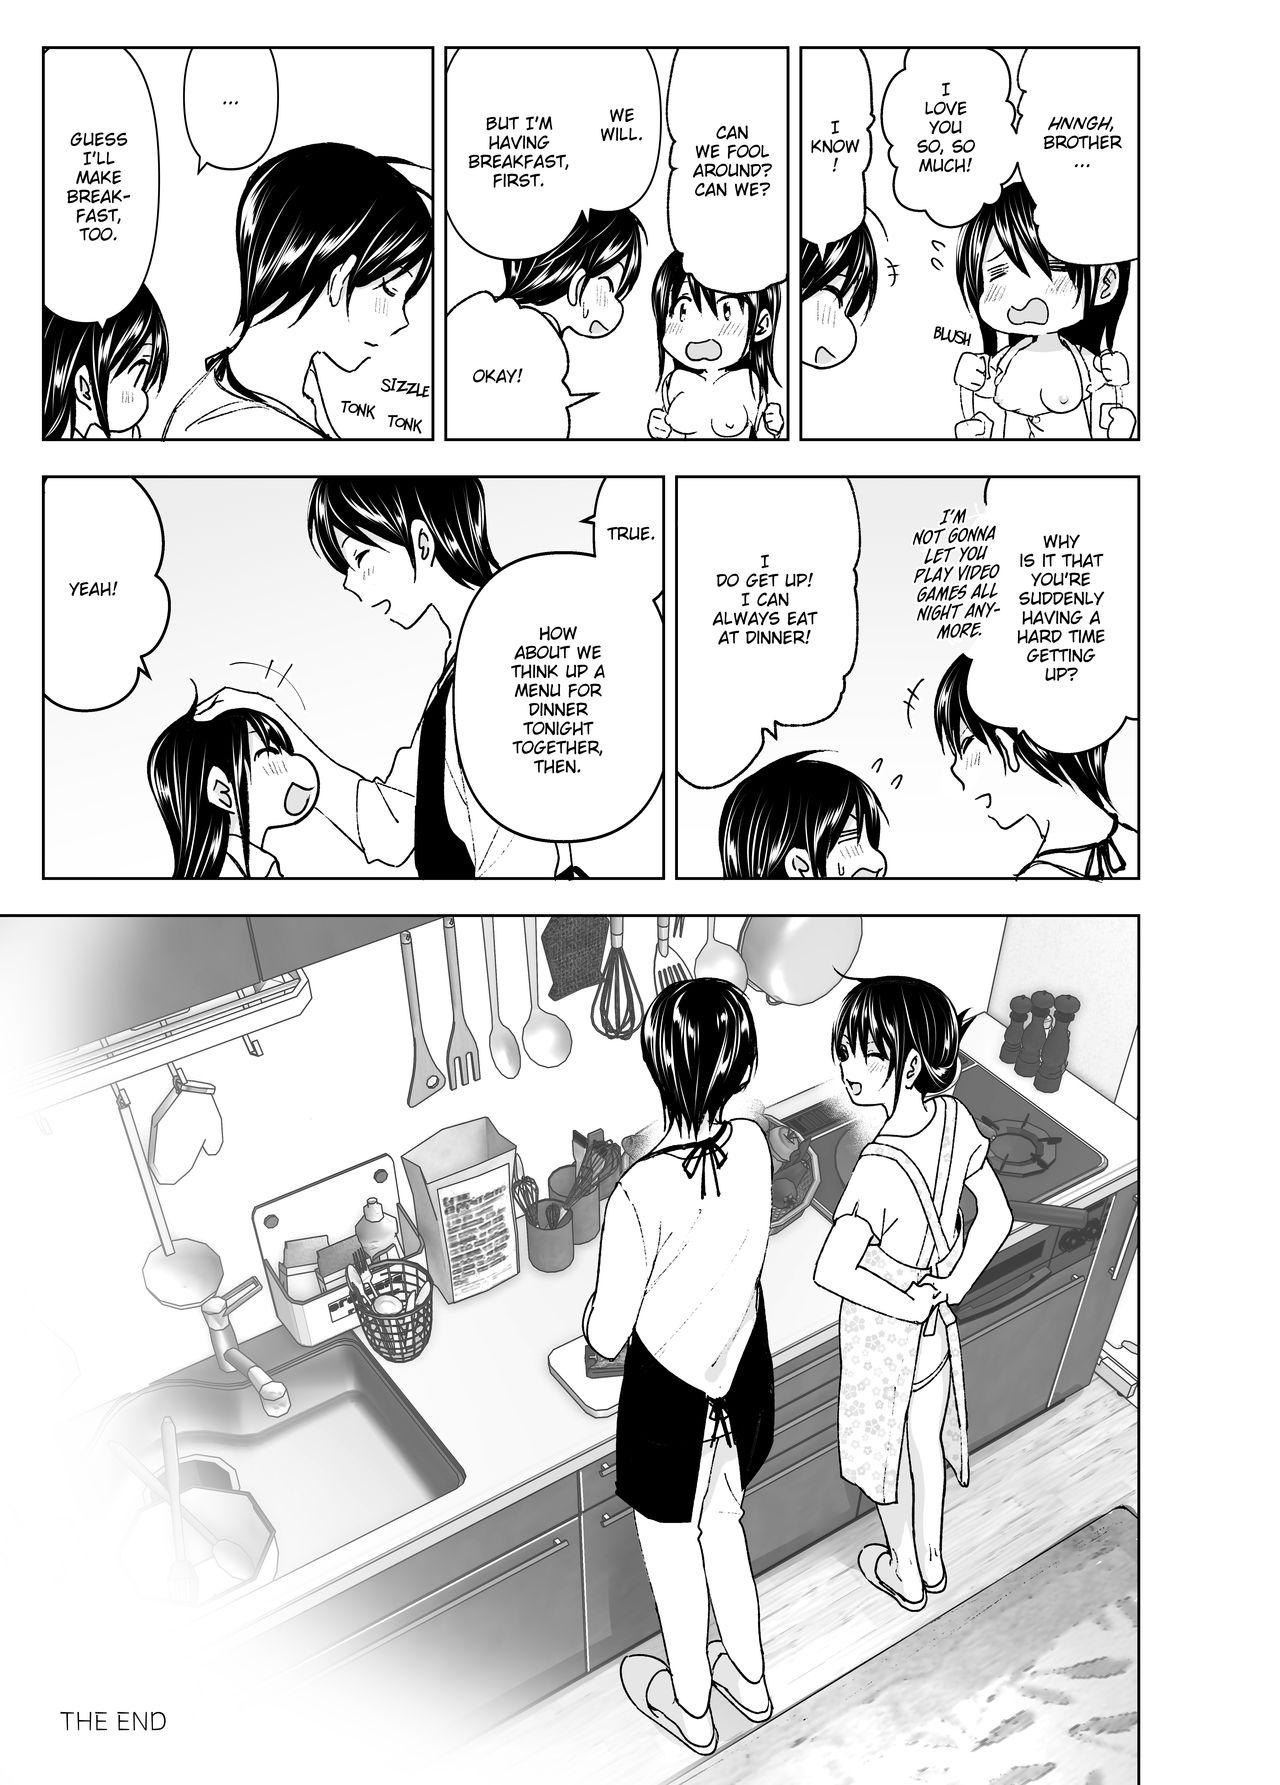 Mallu Onii-chan to Issho! | Hanging Out! With My Big Brother - Original Family - Page 51